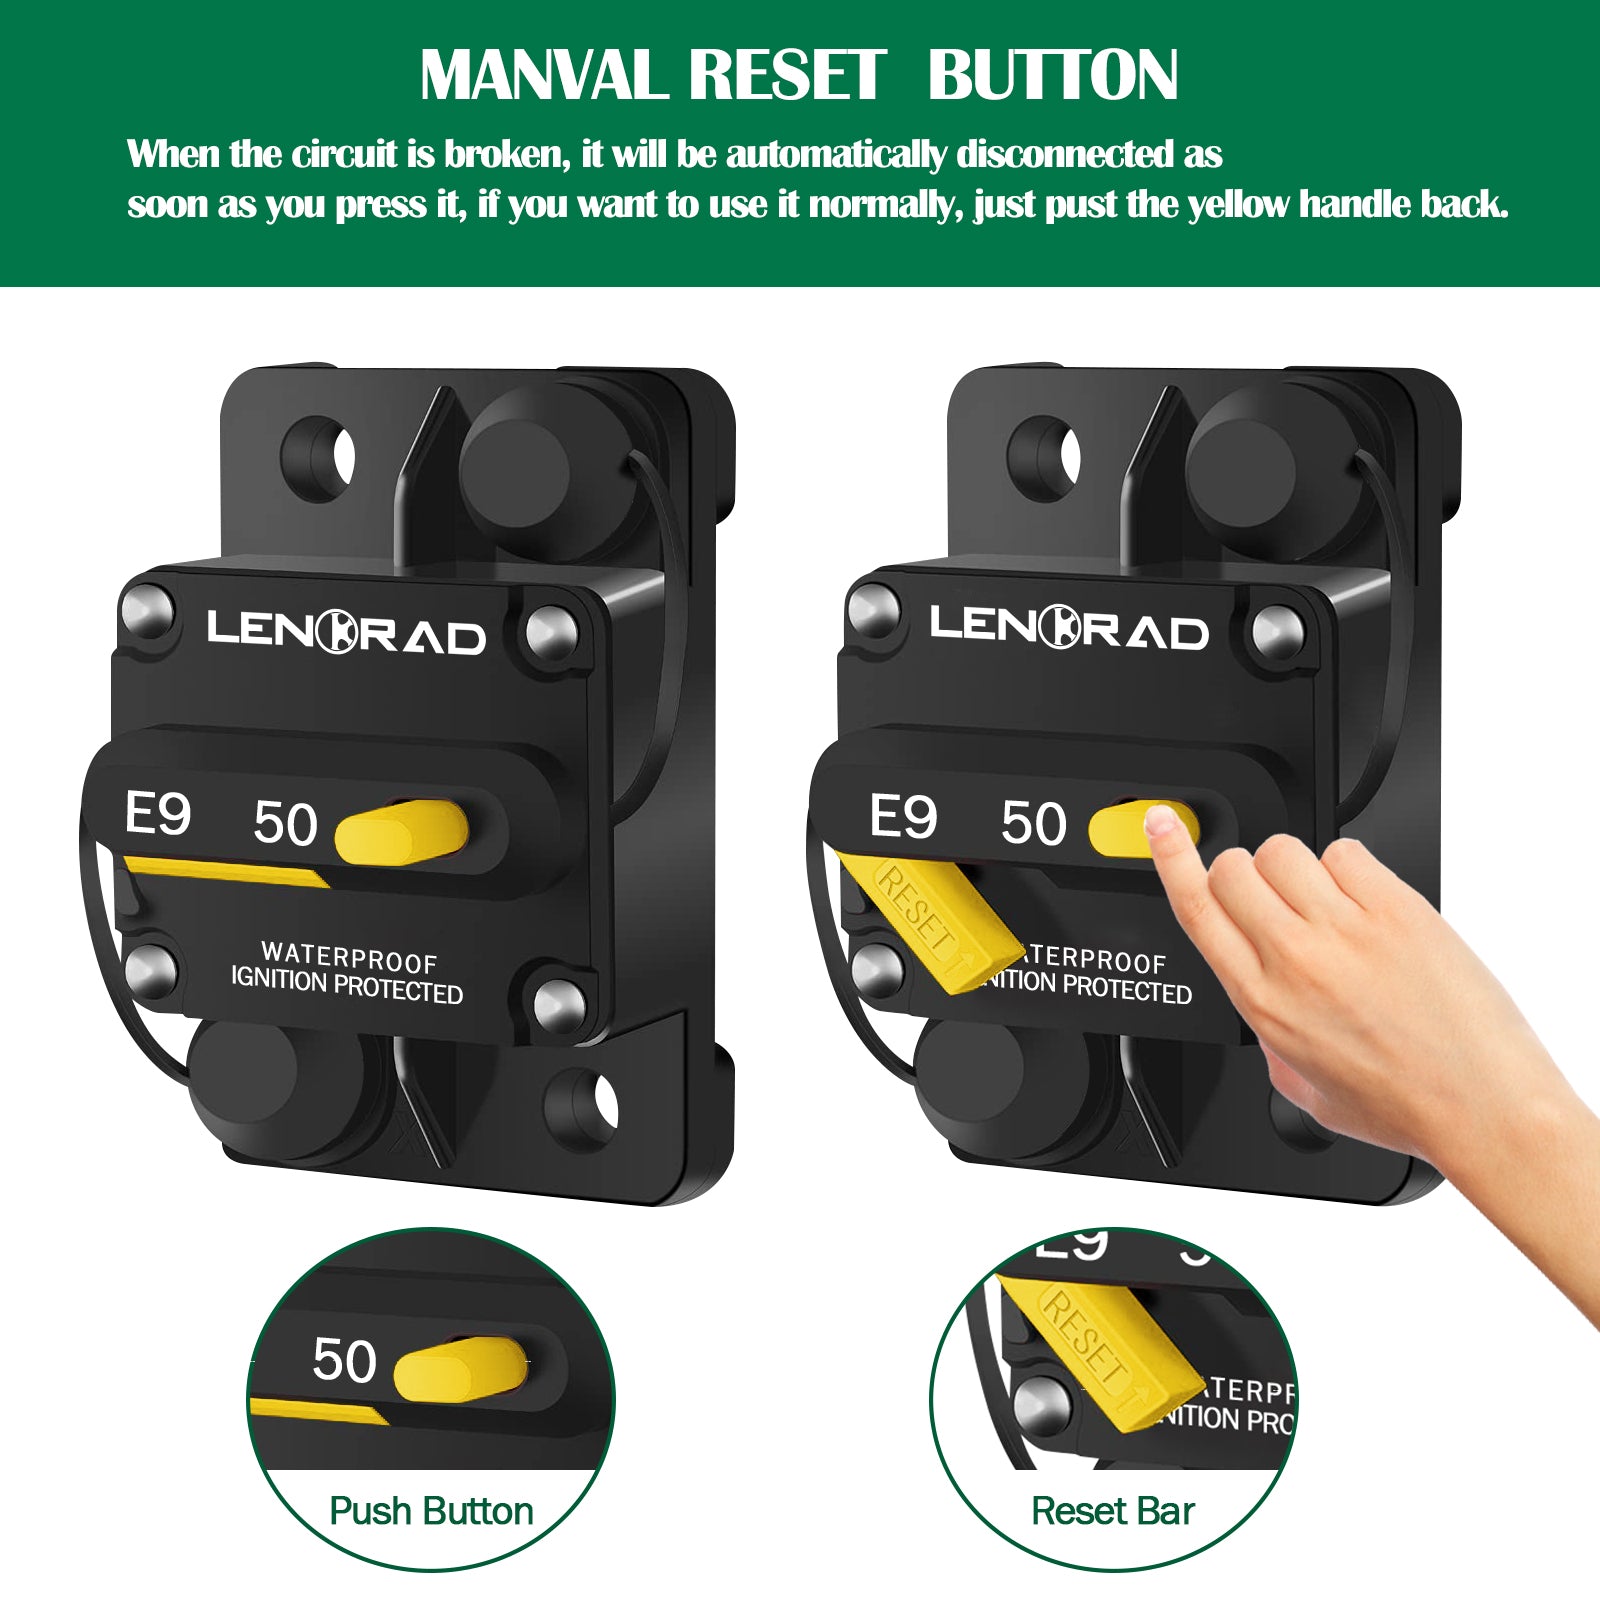 LENKRAD 50 /60 Amp Circuit Breaker 12V with Manual Reset Switch Button for Boat Marine RV Yacht, Boat Circuit Breakers 12V - 48V DC, Waterproof(Surface Mount)